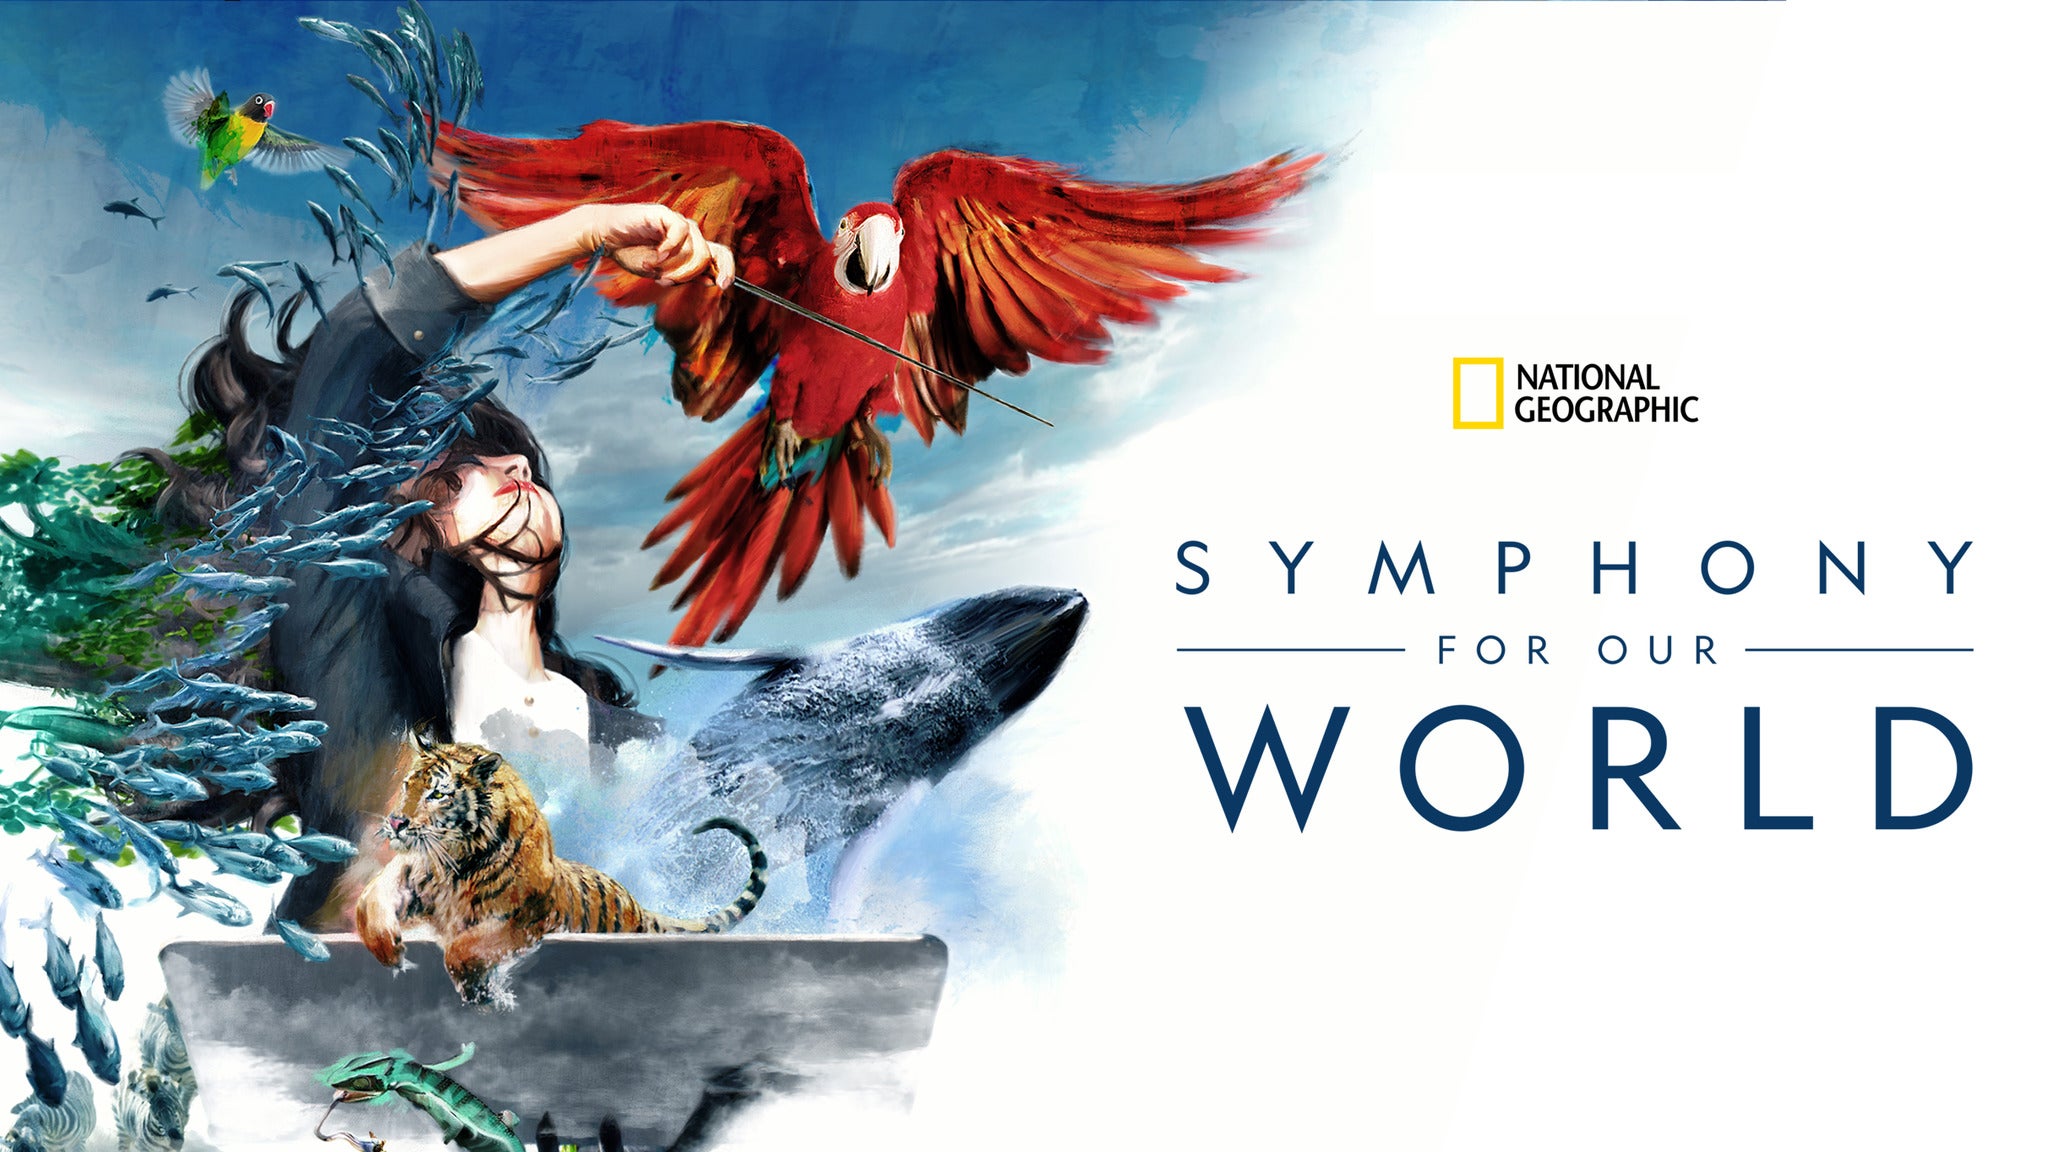 National Geographic: Symphony For Our World in Calgary promo photo for Children's  presale offer code